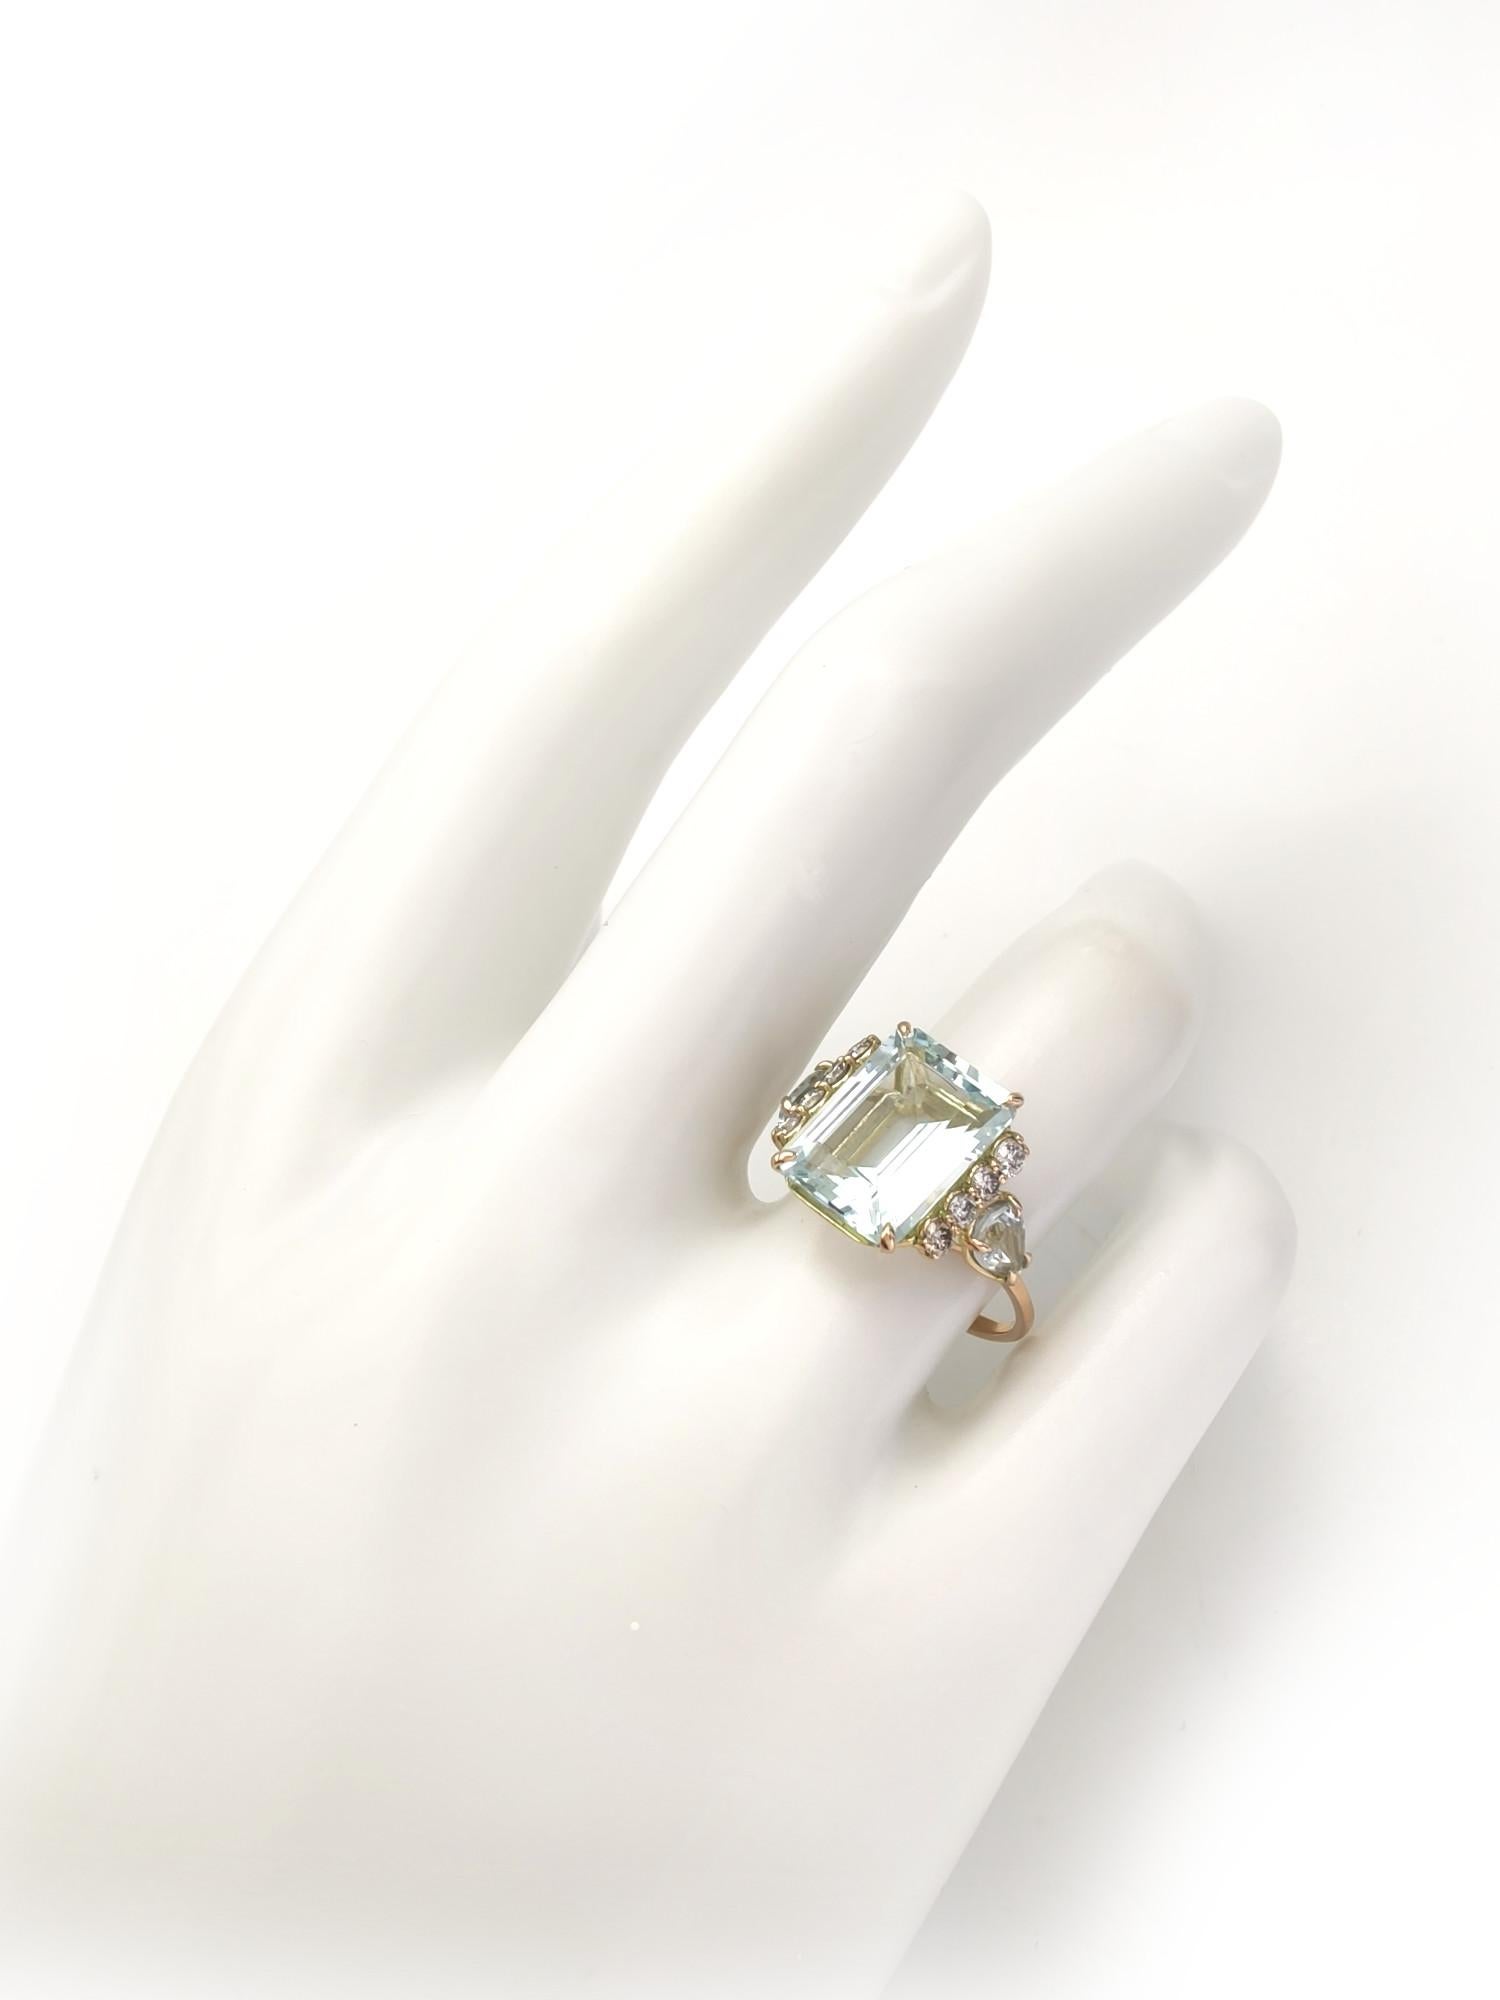 Explore our exquisite women's 14K gold ring adorned with stunning aquamarine and diamonds. An ideal choice for proposals, engagements, and weddings. Discover unique gift ideas that capture the essence of love and commitment. Our handcrafted,